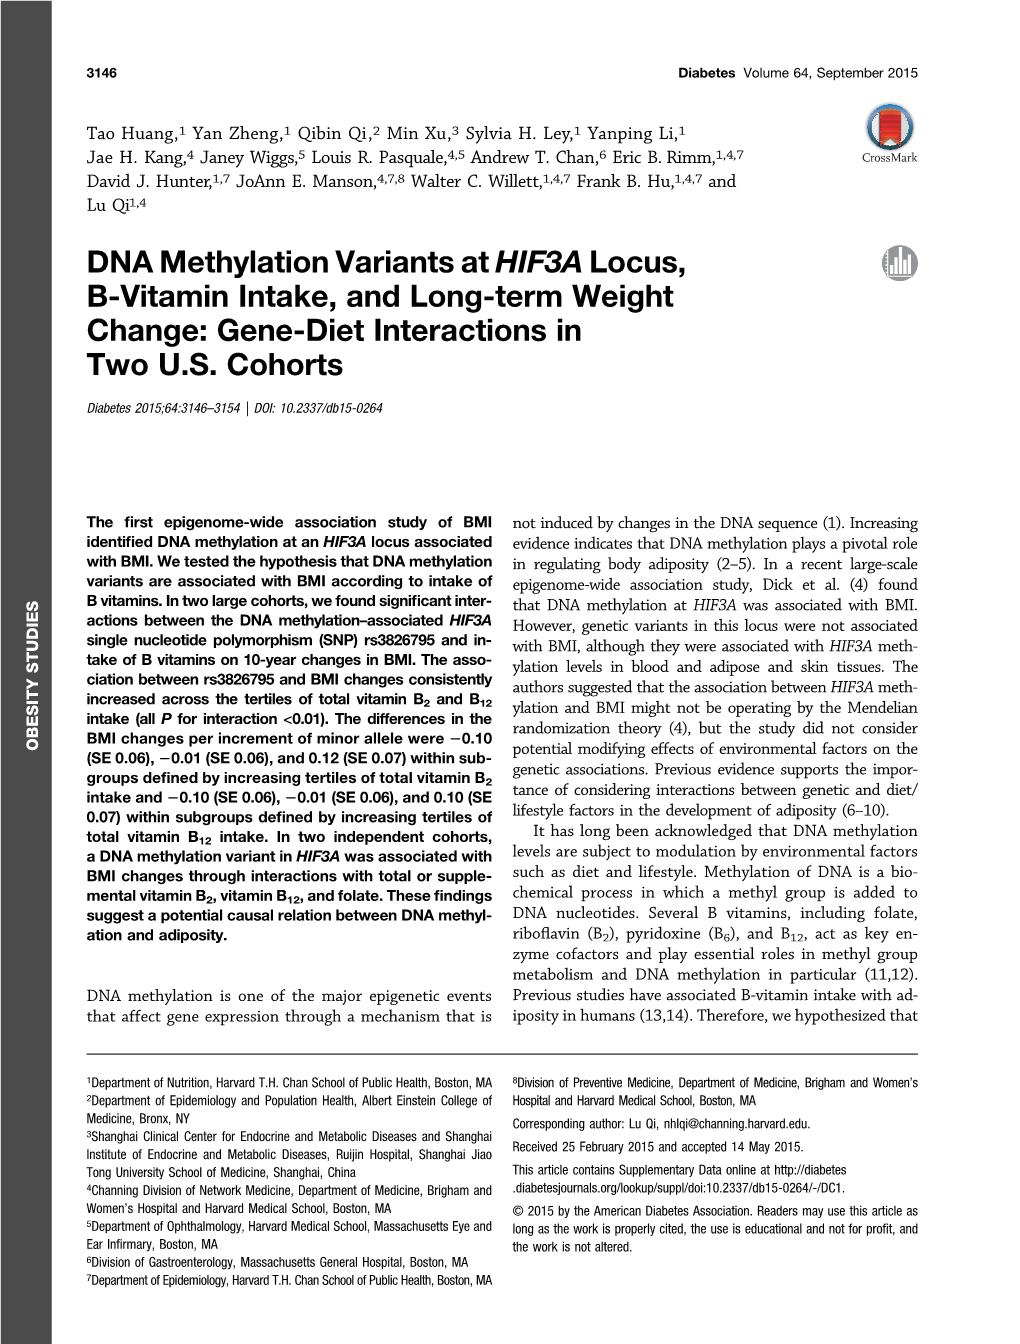 DNA Methylation Variants at HIF3A Locus, B-Vitamin Intake, and Long-Term Weight Change: Gene-Diet Interactions in Two U.S